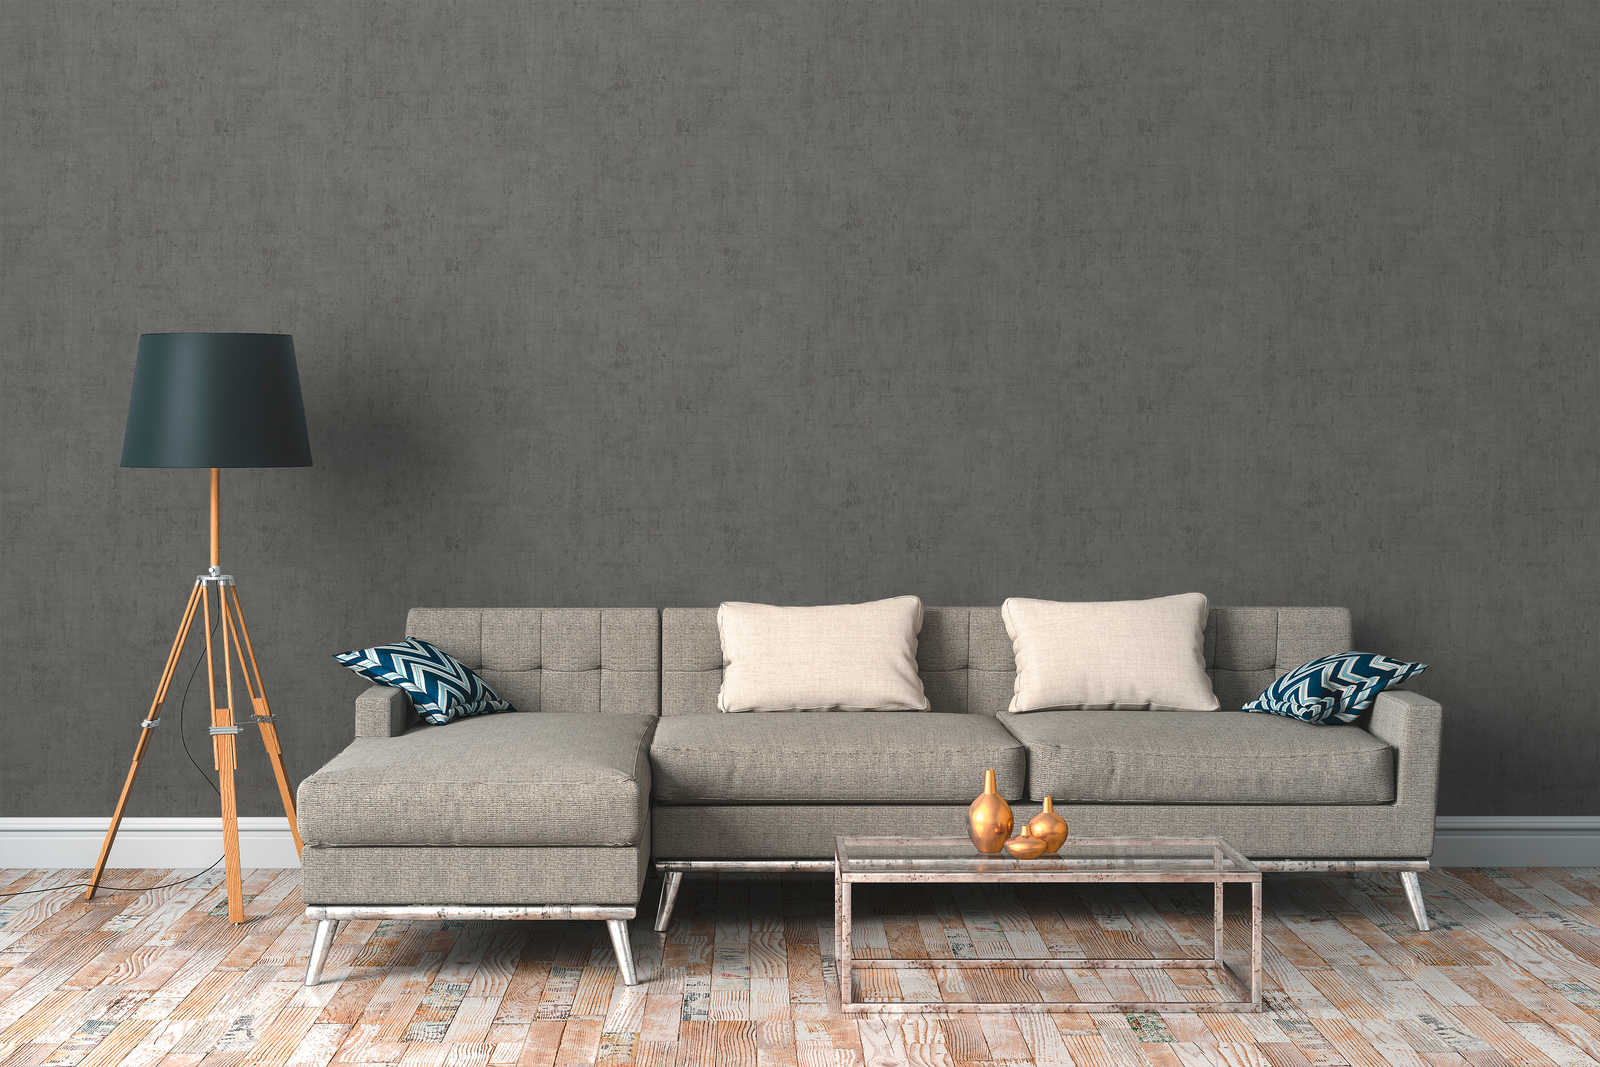             Wallpaper dark grey with plaster opics & embossed structure
        